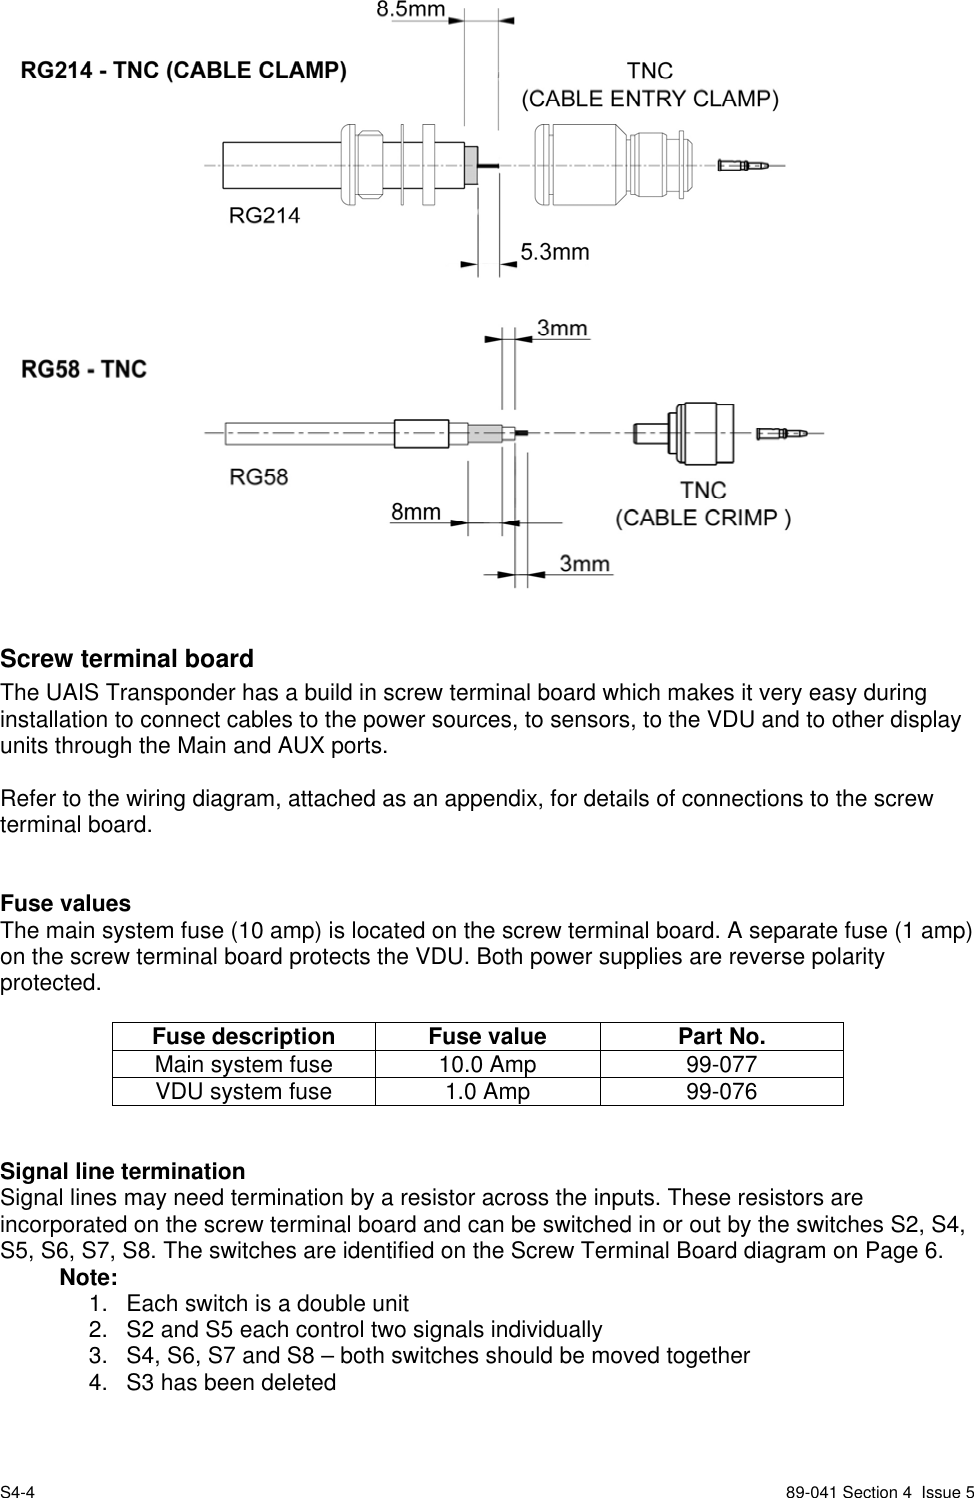 S4-4 89-041 Section 4  Issue 5Screw terminal boardThe UAIS Transponder has a build in screw terminal board which makes it very easy duringinstallation to connect cables to the power sources, to sensors, to the VDU and to other displayunits through the Main and AUX ports.Refer to the wiring diagram, attached as an appendix, for details of connections to the screwterminal board.Fuse valuesThe main system fuse (10 amp) is located on the screw terminal board. A separate fuse (1 amp)on the screw terminal board protects the VDU. Both power supplies are reverse polarityprotected.Fuse description Fuse value Part No.Main system fuse 10.0 Amp 99-077VDU system fuse 1.0 Amp 99-076Signal line terminationSignal lines may need termination by a resistor across the inputs. These resistors areincorporated on the screw terminal board and can be switched in or out by the switches S2, S4,S5, S6, S7, S8. The switches are identified on the Screw Terminal Board diagram on Page 6.Note:1.  Each switch is a double unit2.  S2 and S5 each control two signals individually3.  S4, S6, S7 and S8 – both switches should be moved together4.  S3 has been deleted